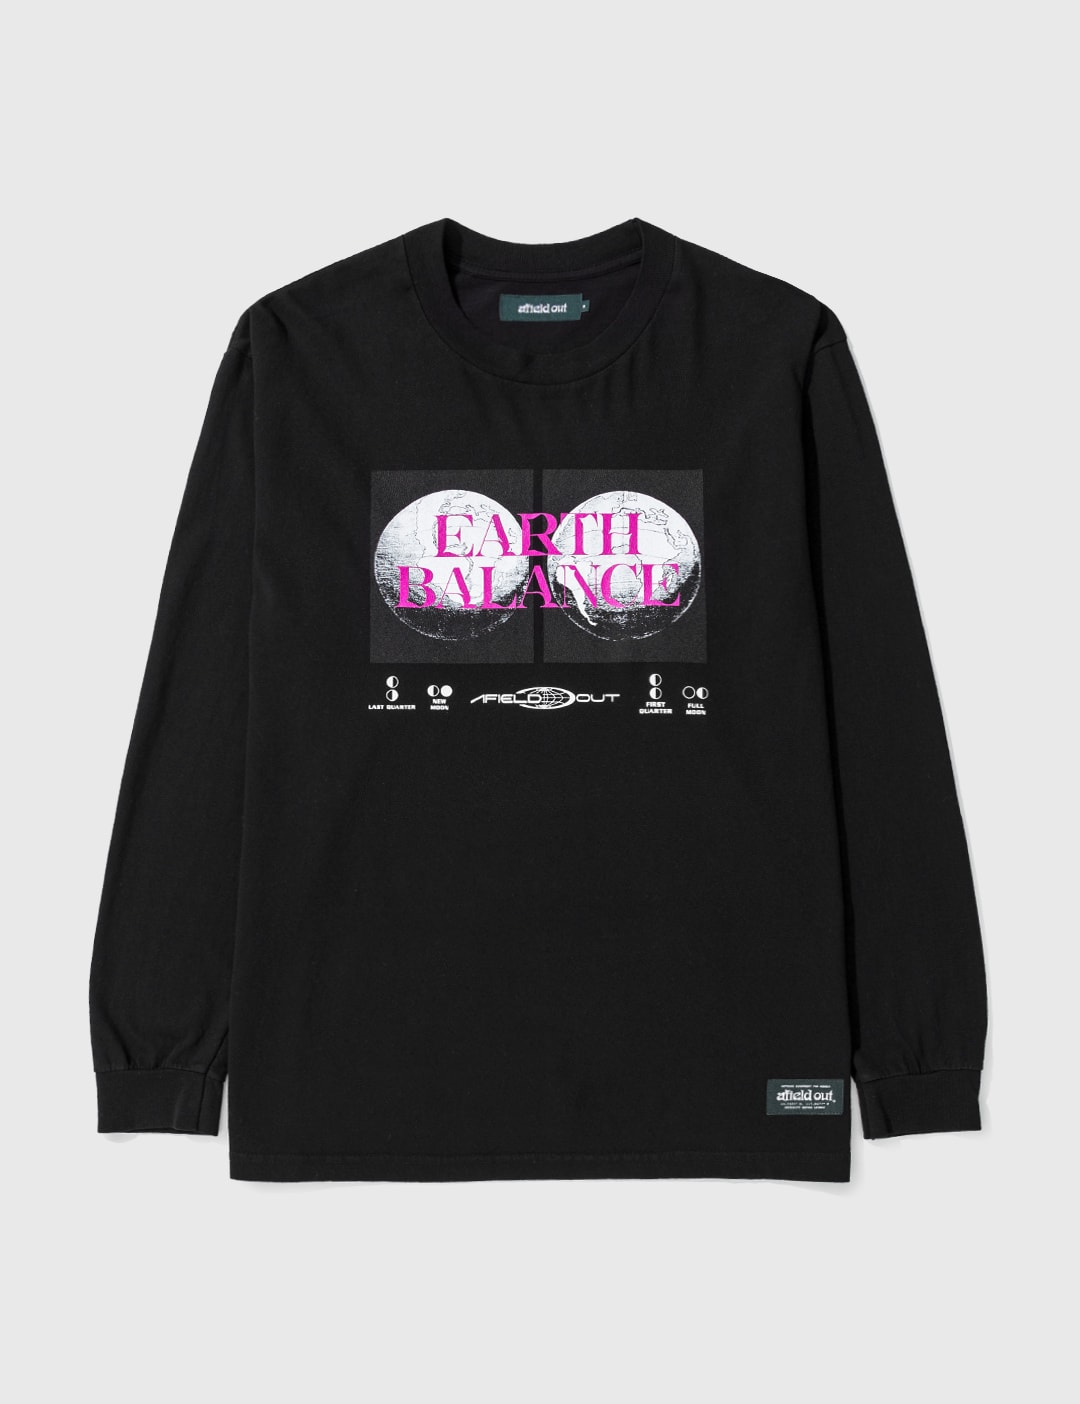 Afield Out - Balance Long Sleeve T-shirt | HBX - Globally Curated ...